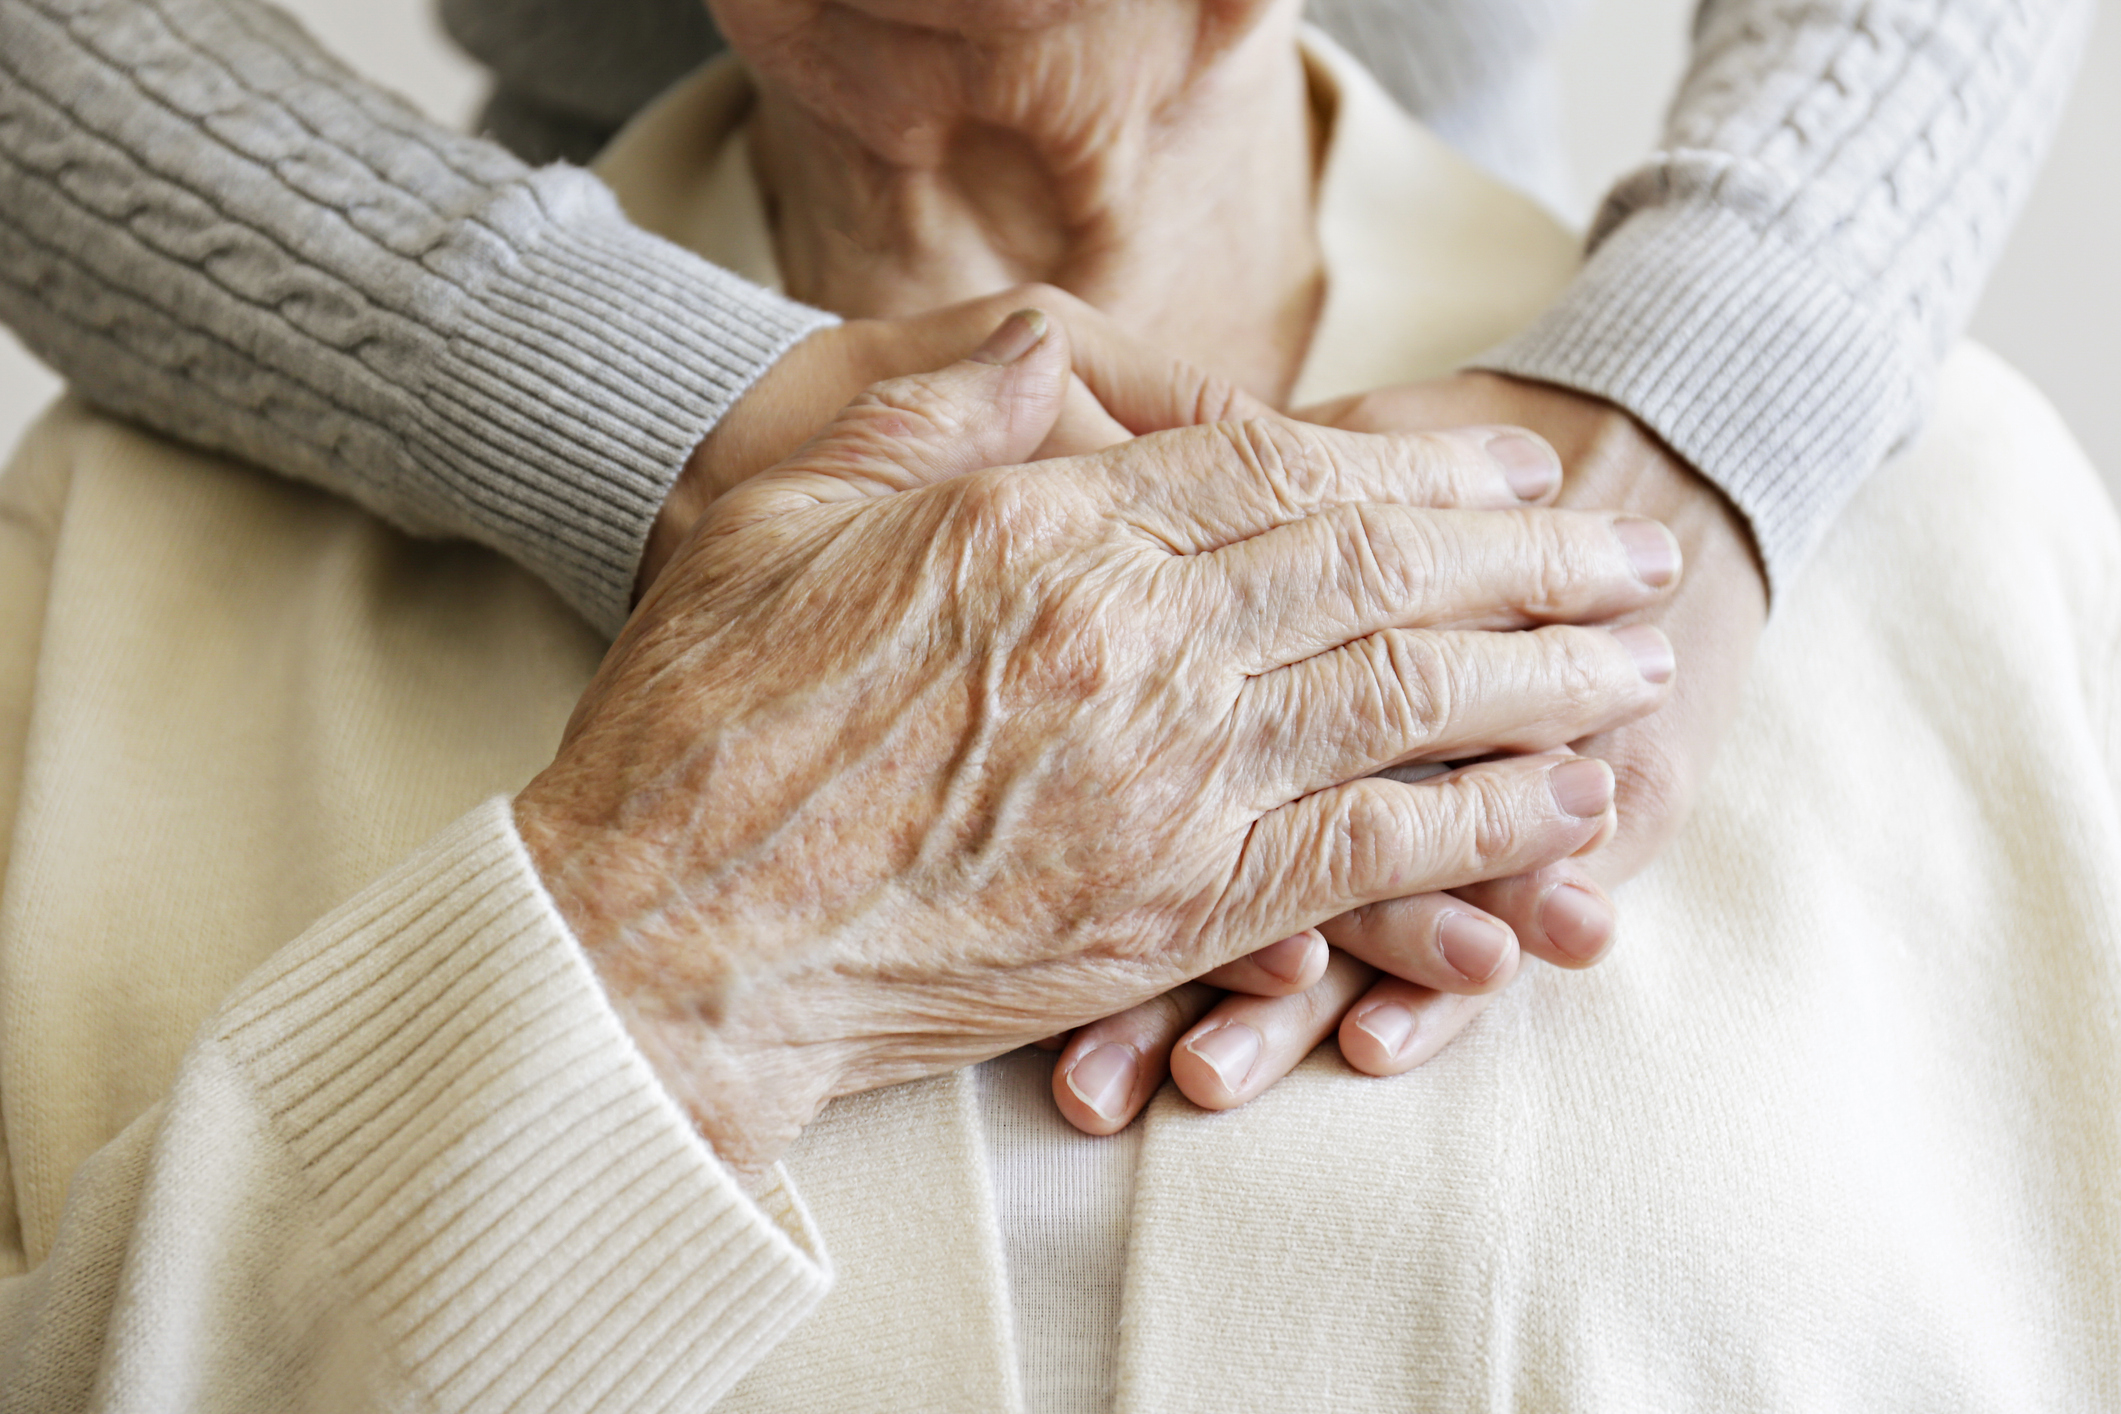 Image of hands over elderly woman's chest